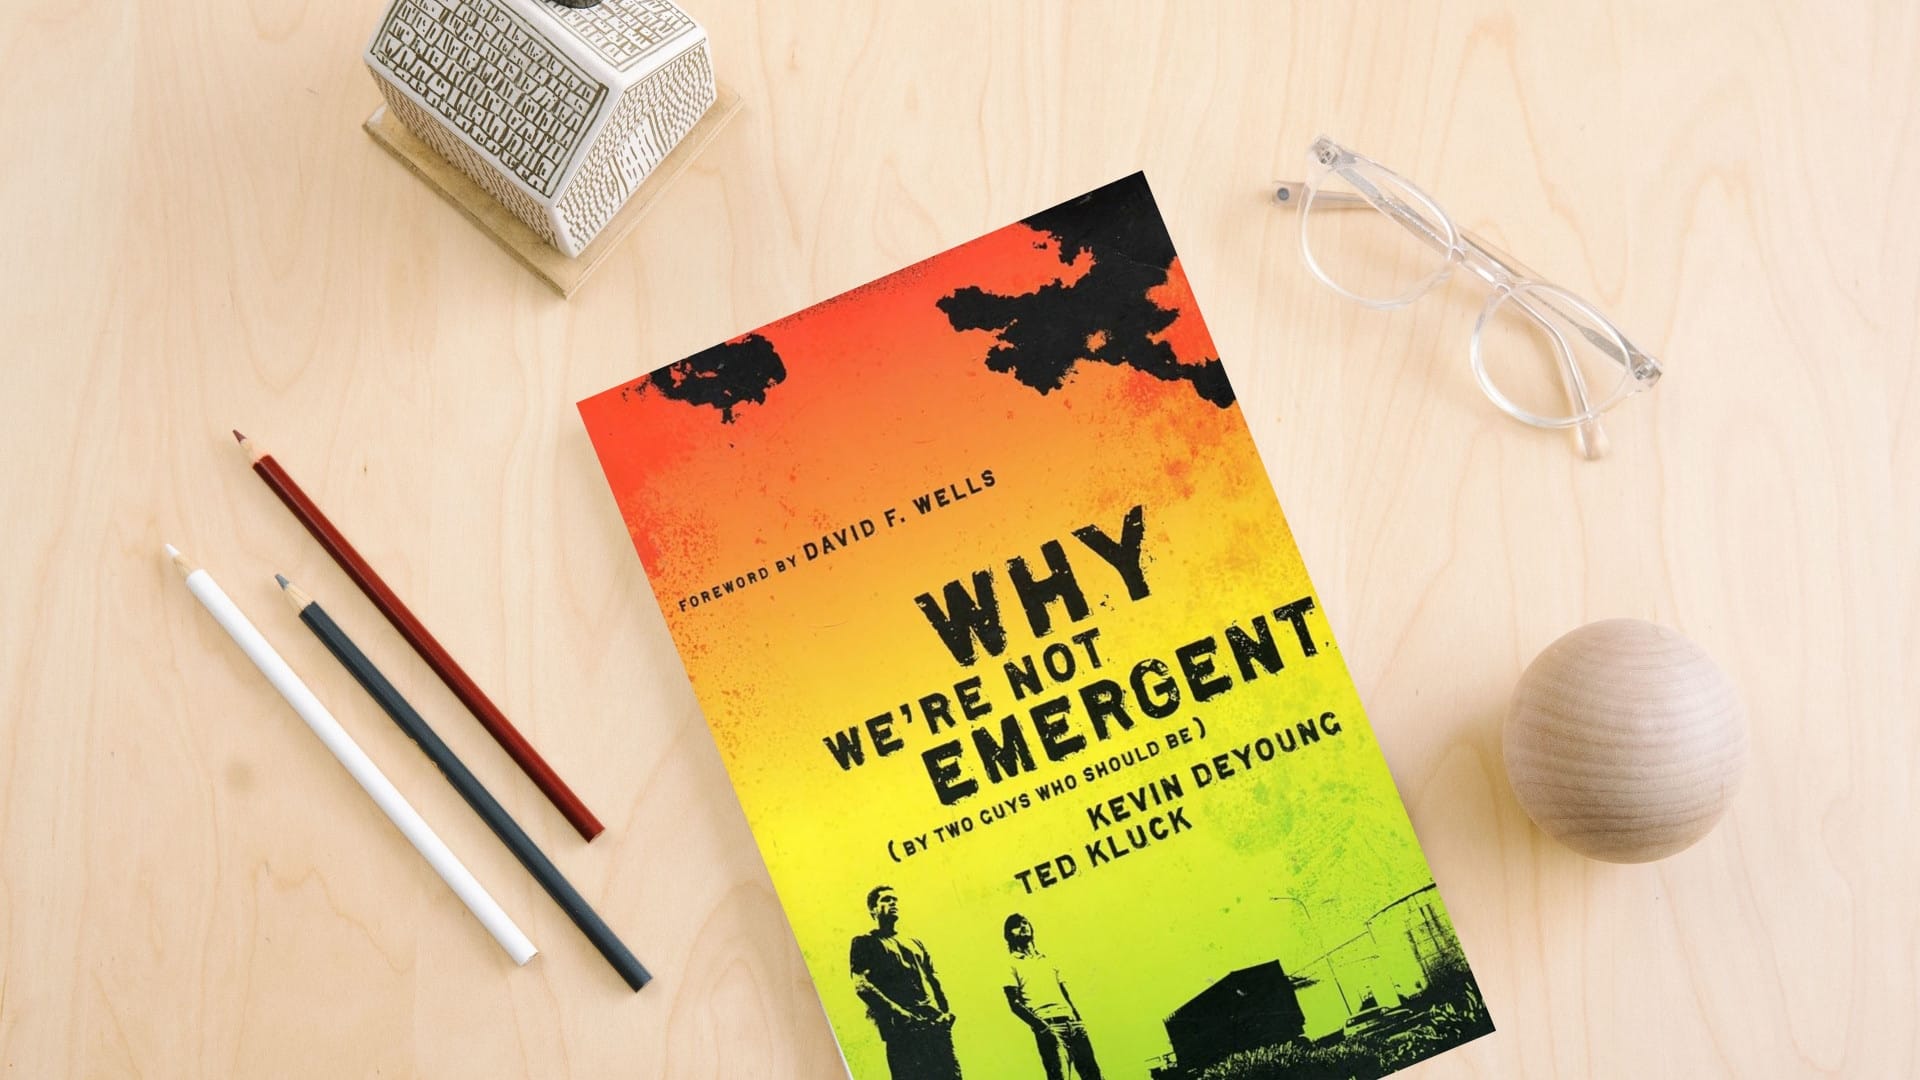 Why We're Not Emergent